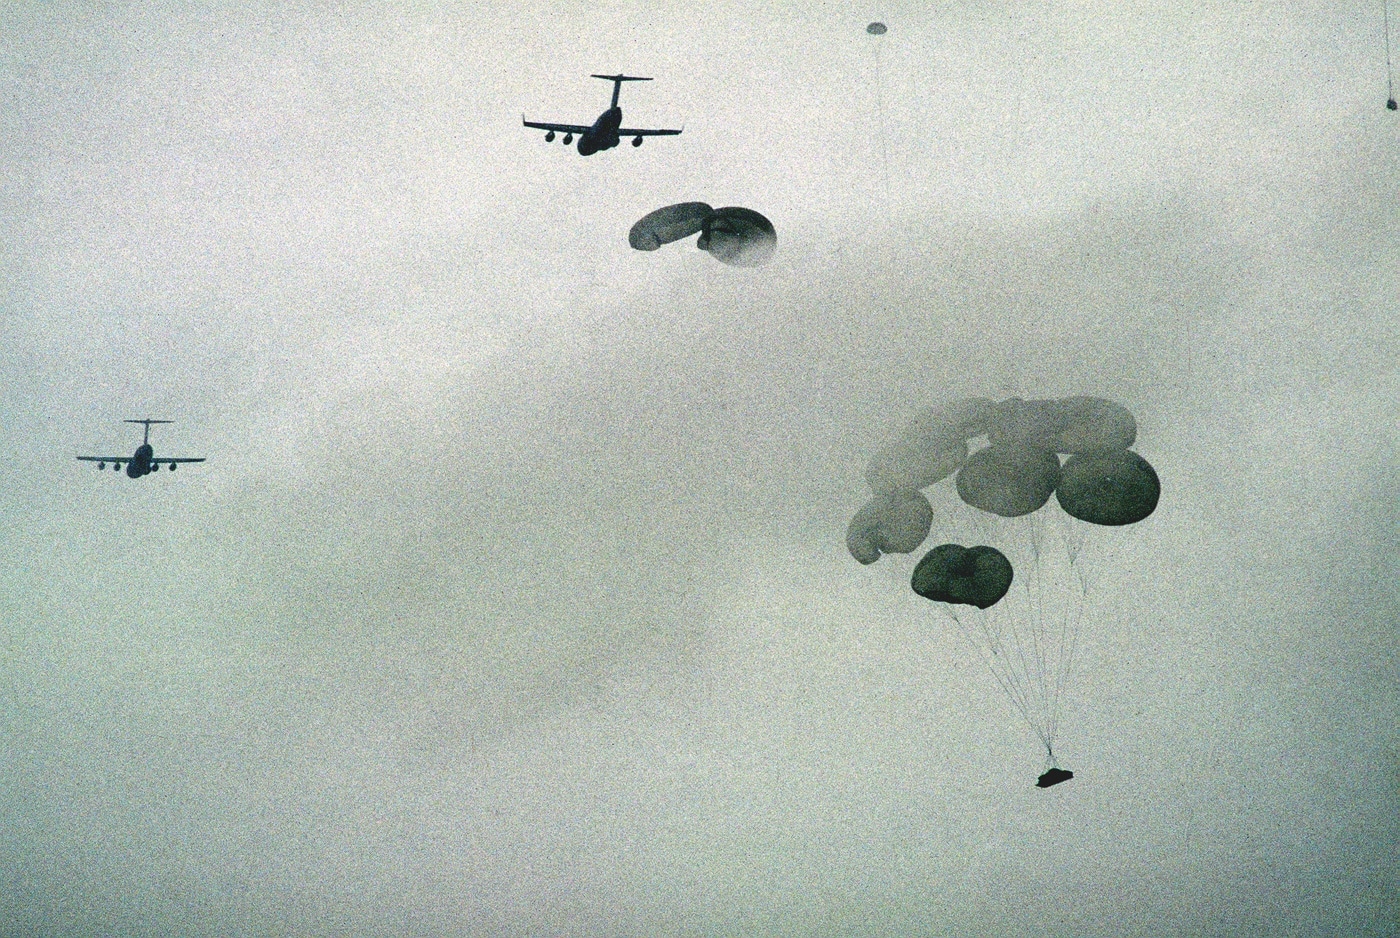 m551 air drop from c-17